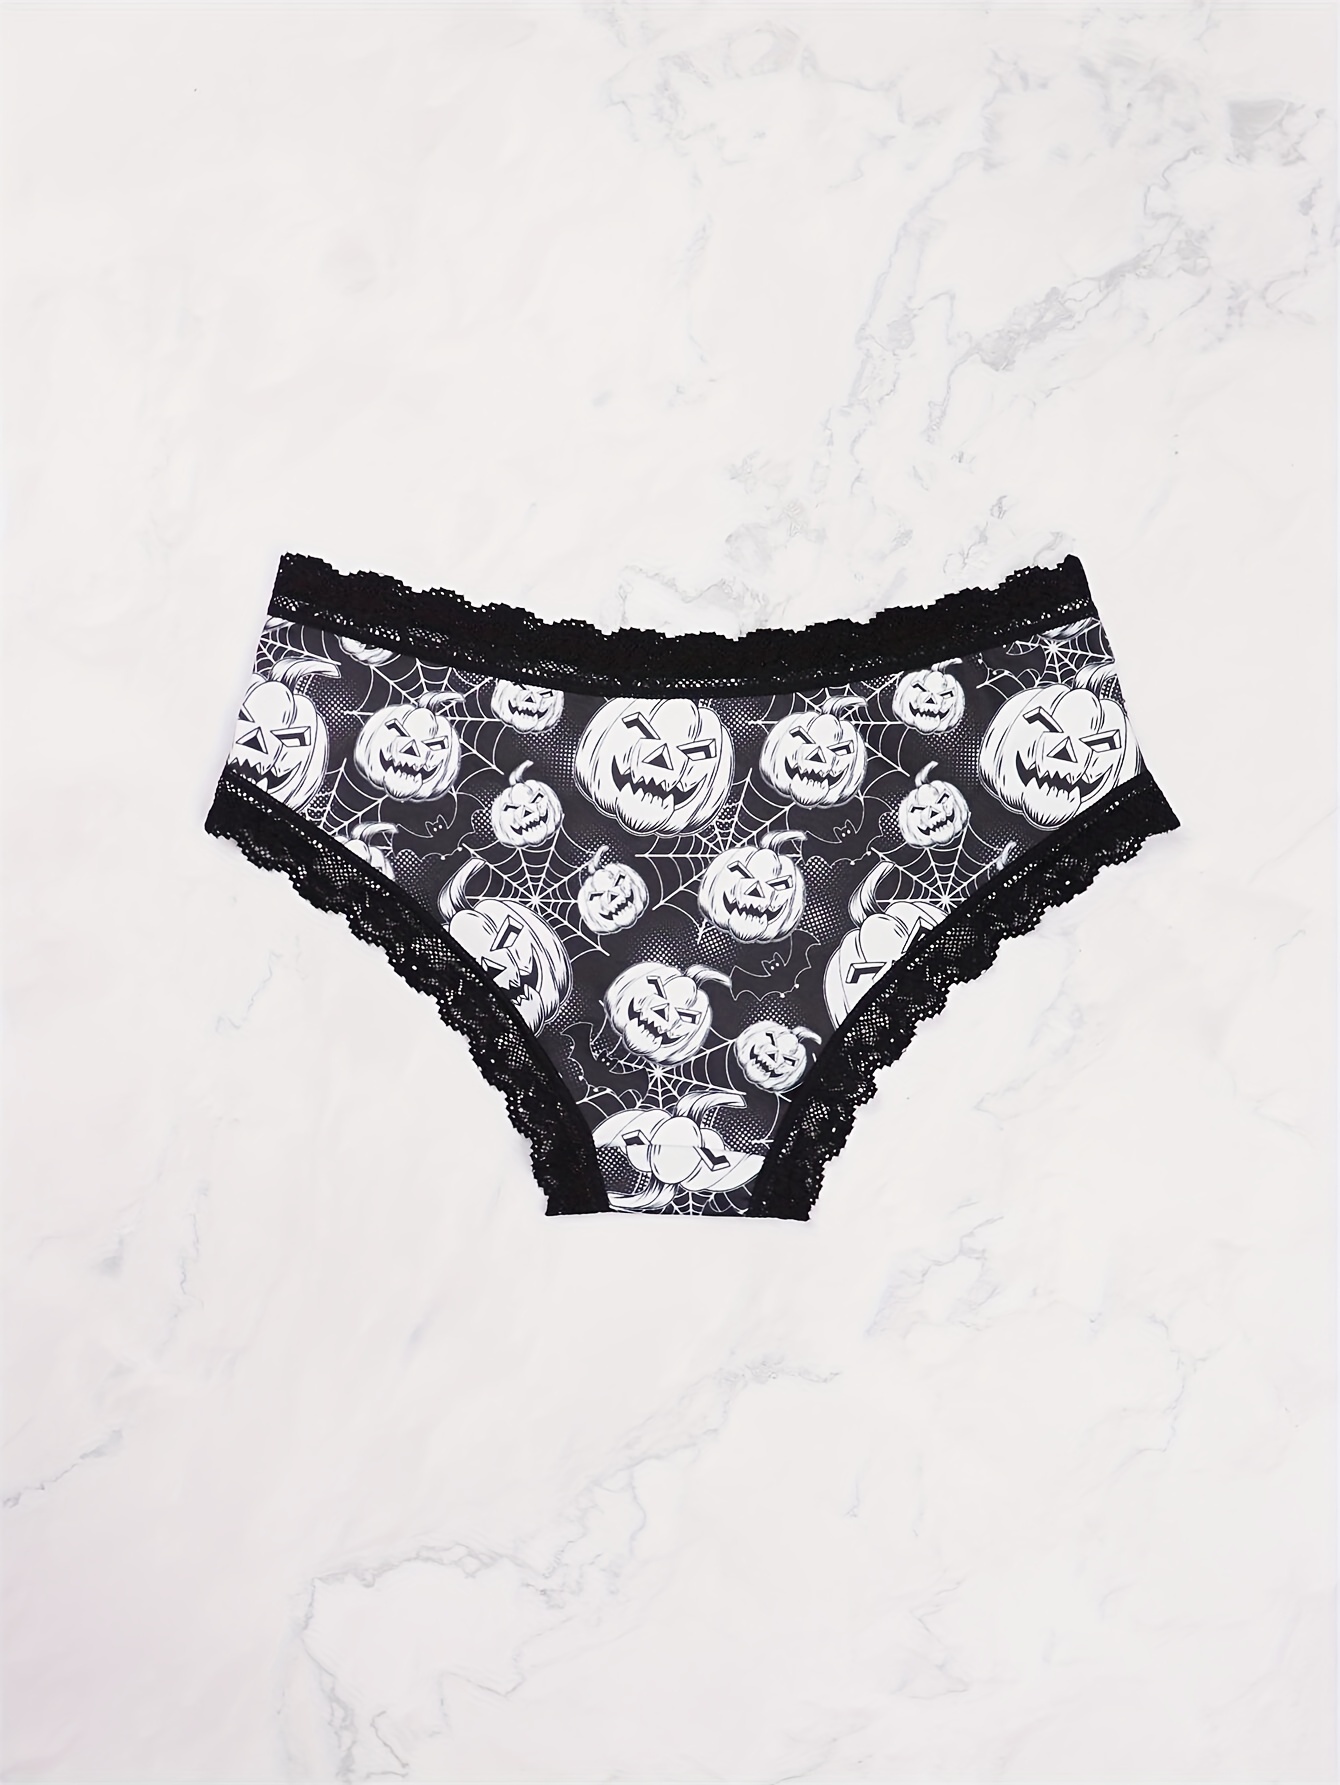 3pcs Gothic Contrast Lace Hipster Panties, Halloween Skull & Star Print  Intimates Panties, Women's Underwear & Lingerie